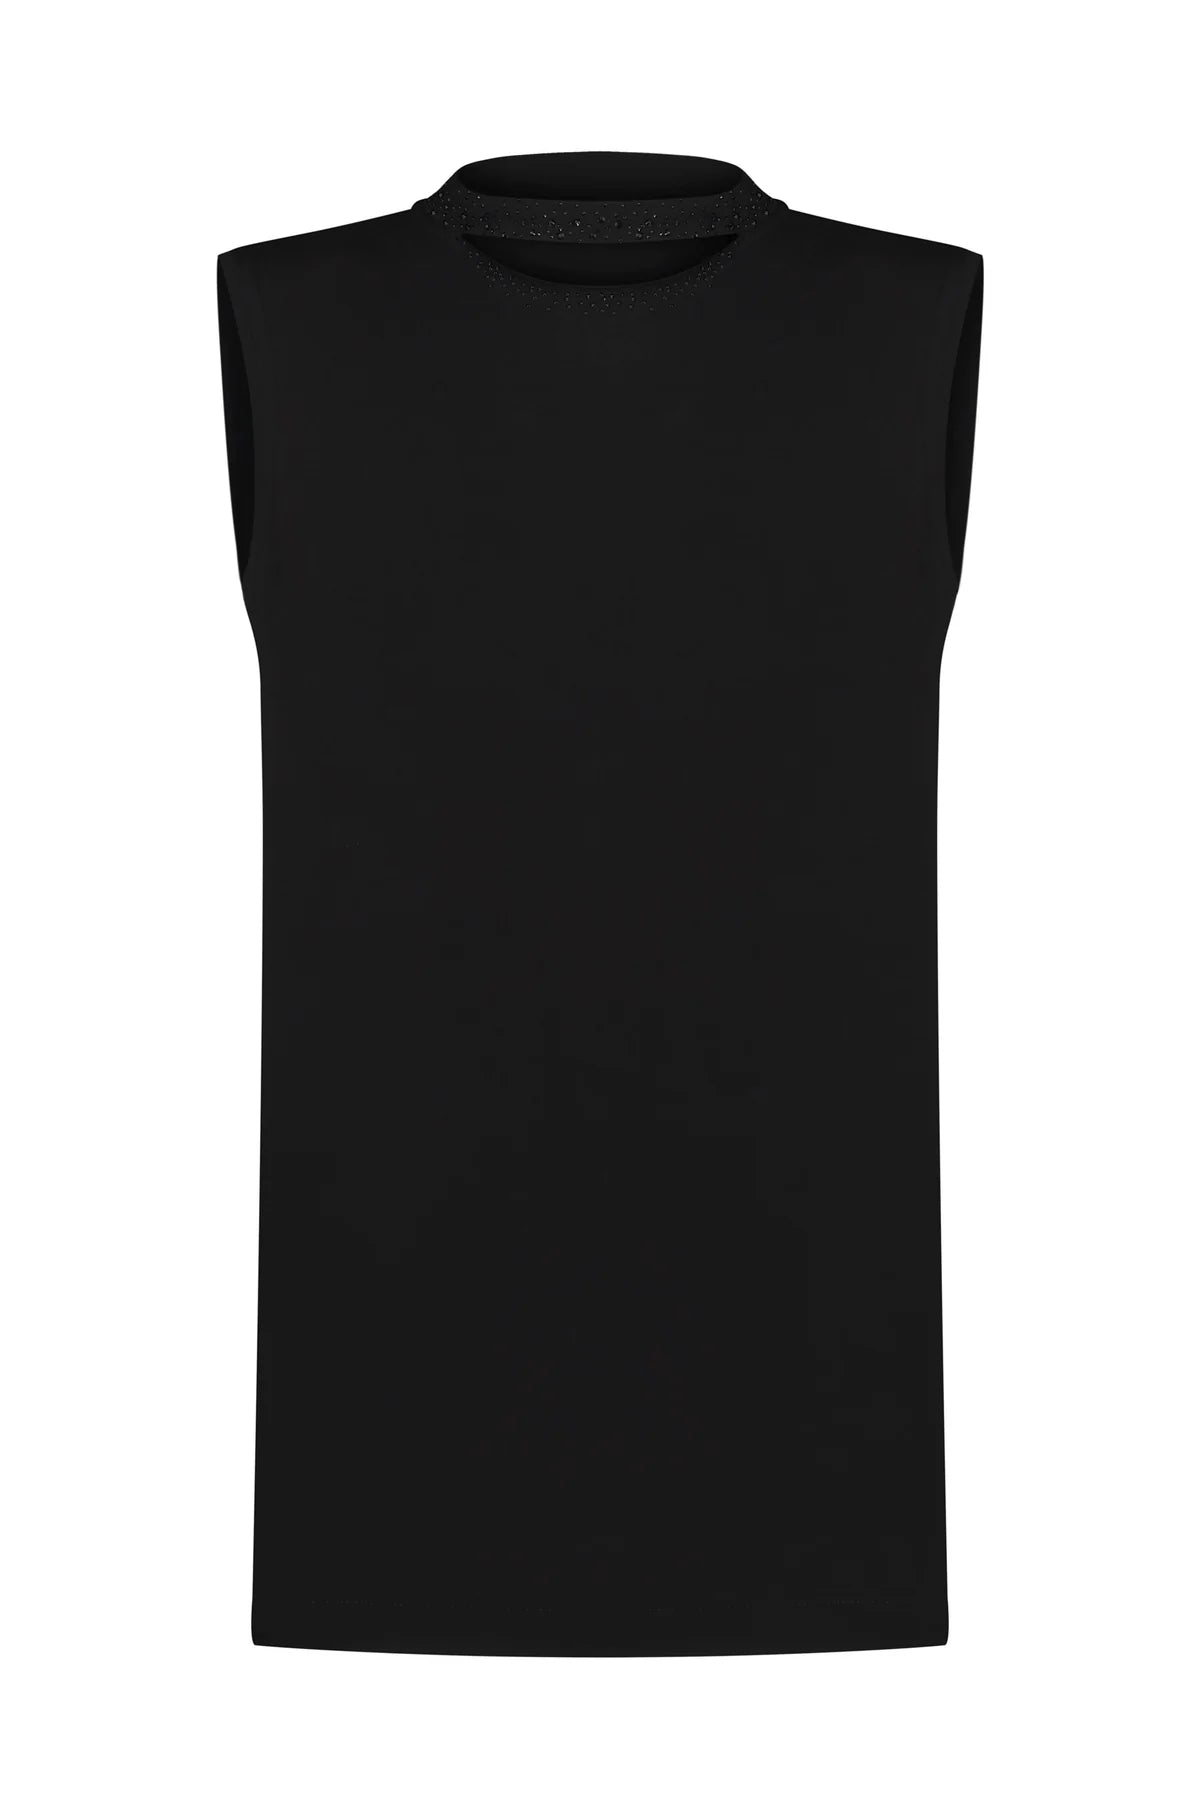 Sleeveless T-shirt with a Cut out on the Front